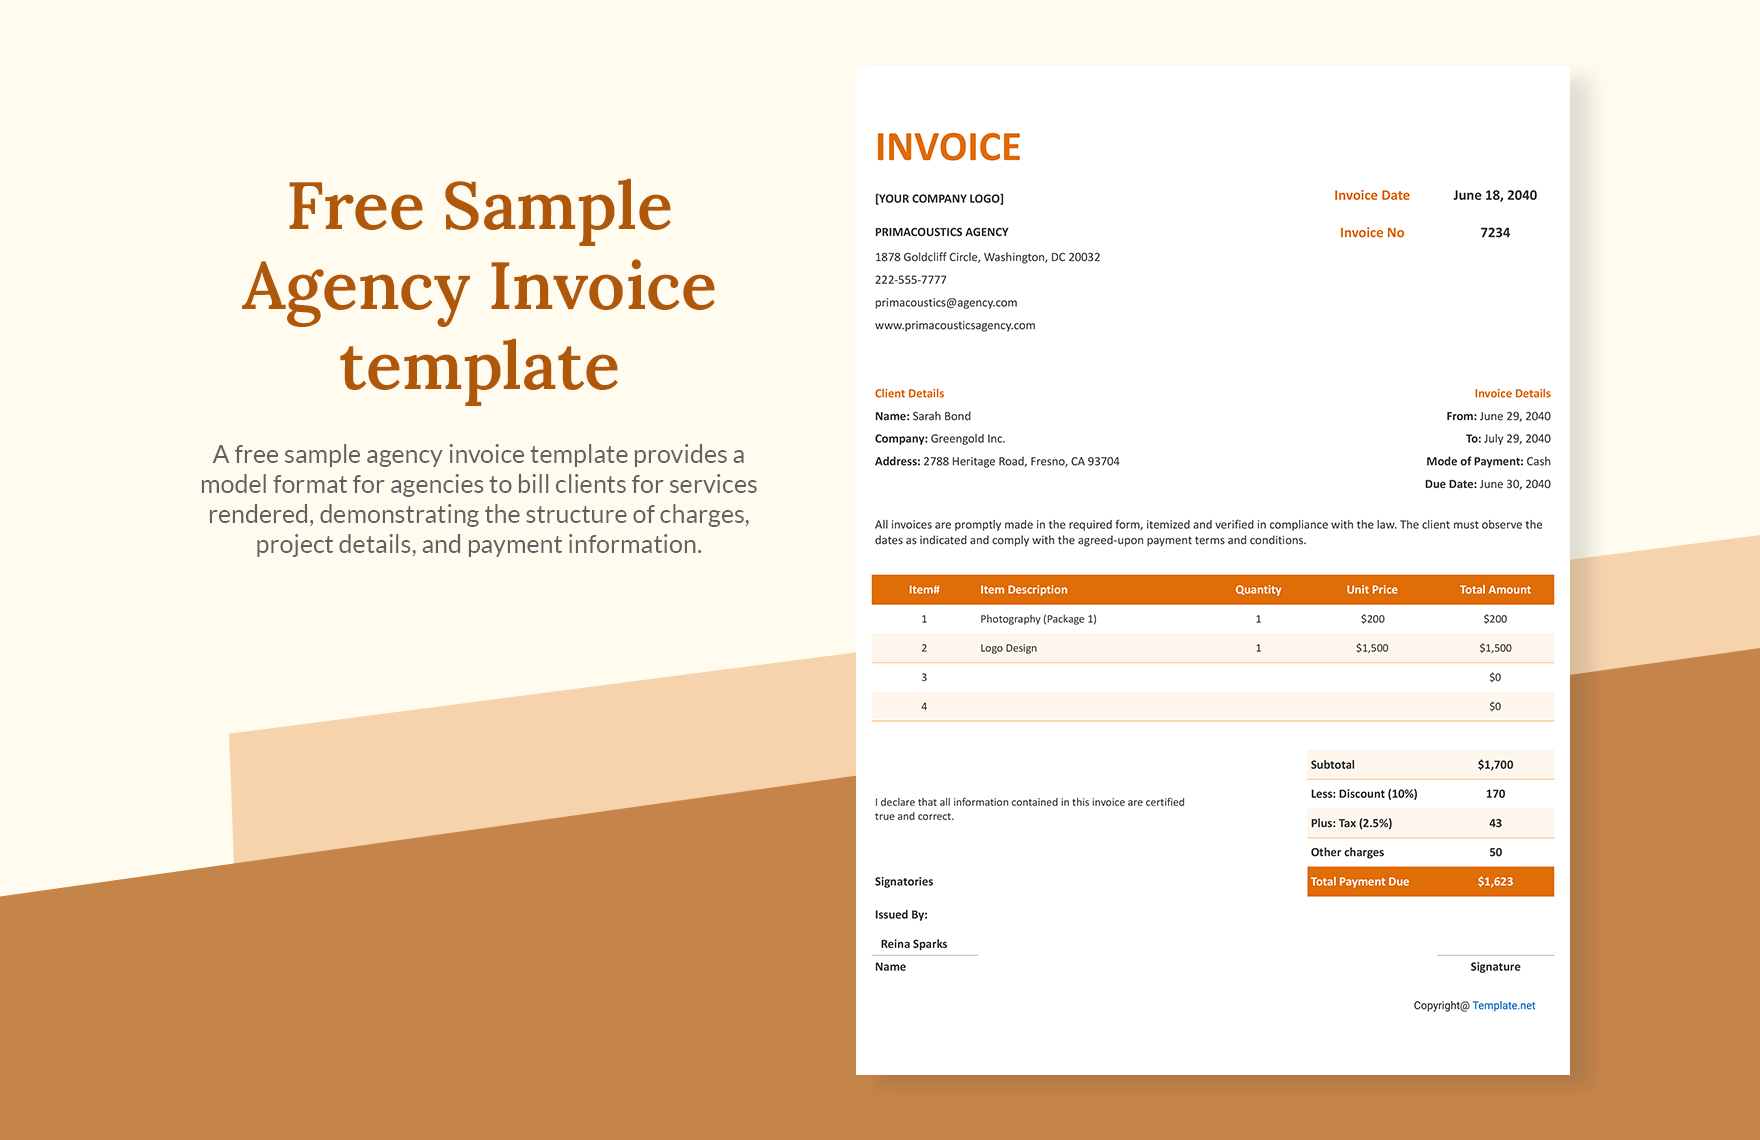 Sample Agency Invoice template